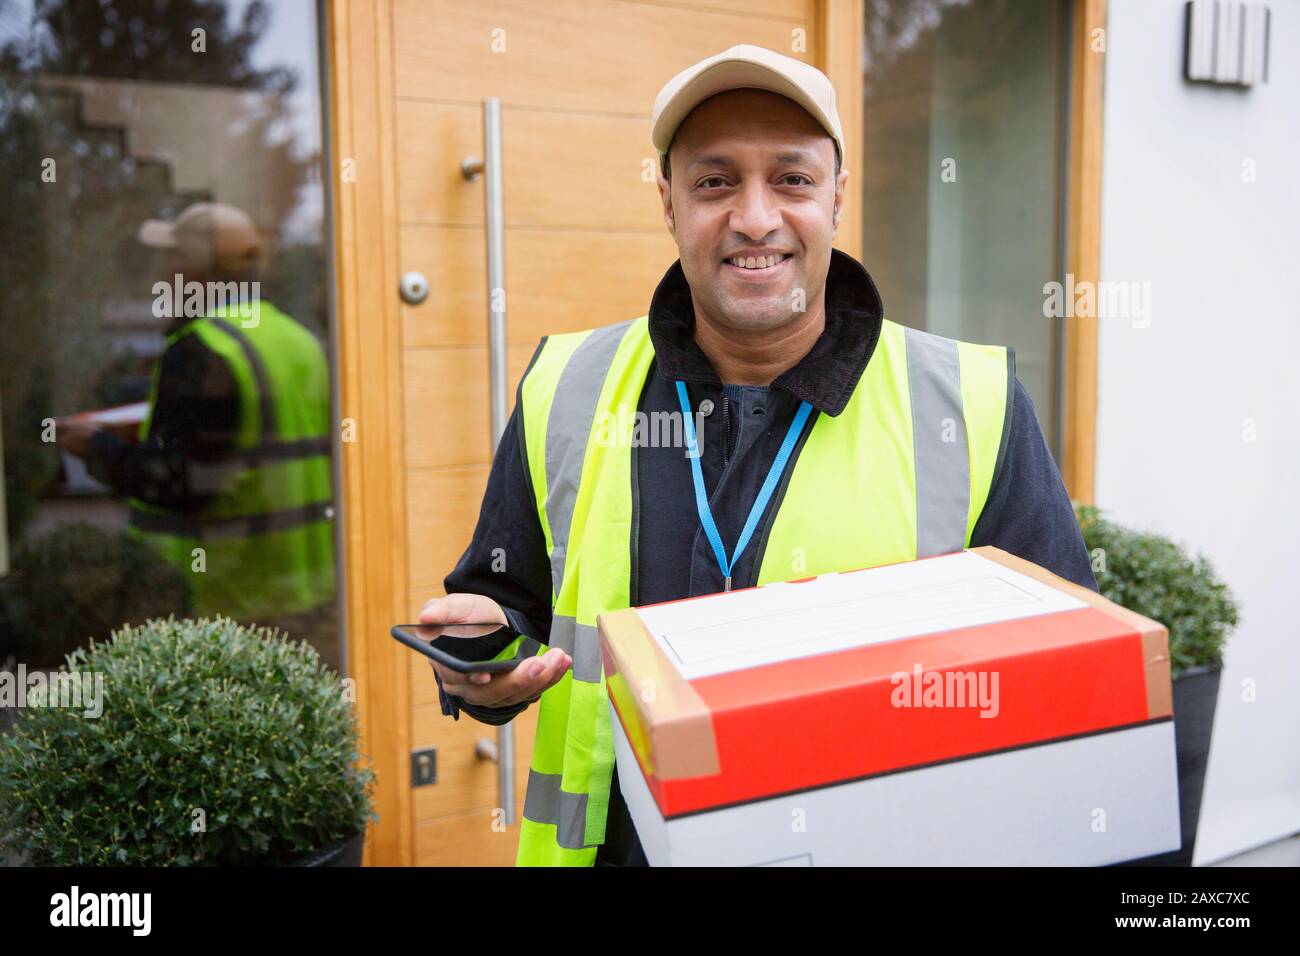 Portrait confident, friendly deliveryman with package and smart phone at front door Stock Photo